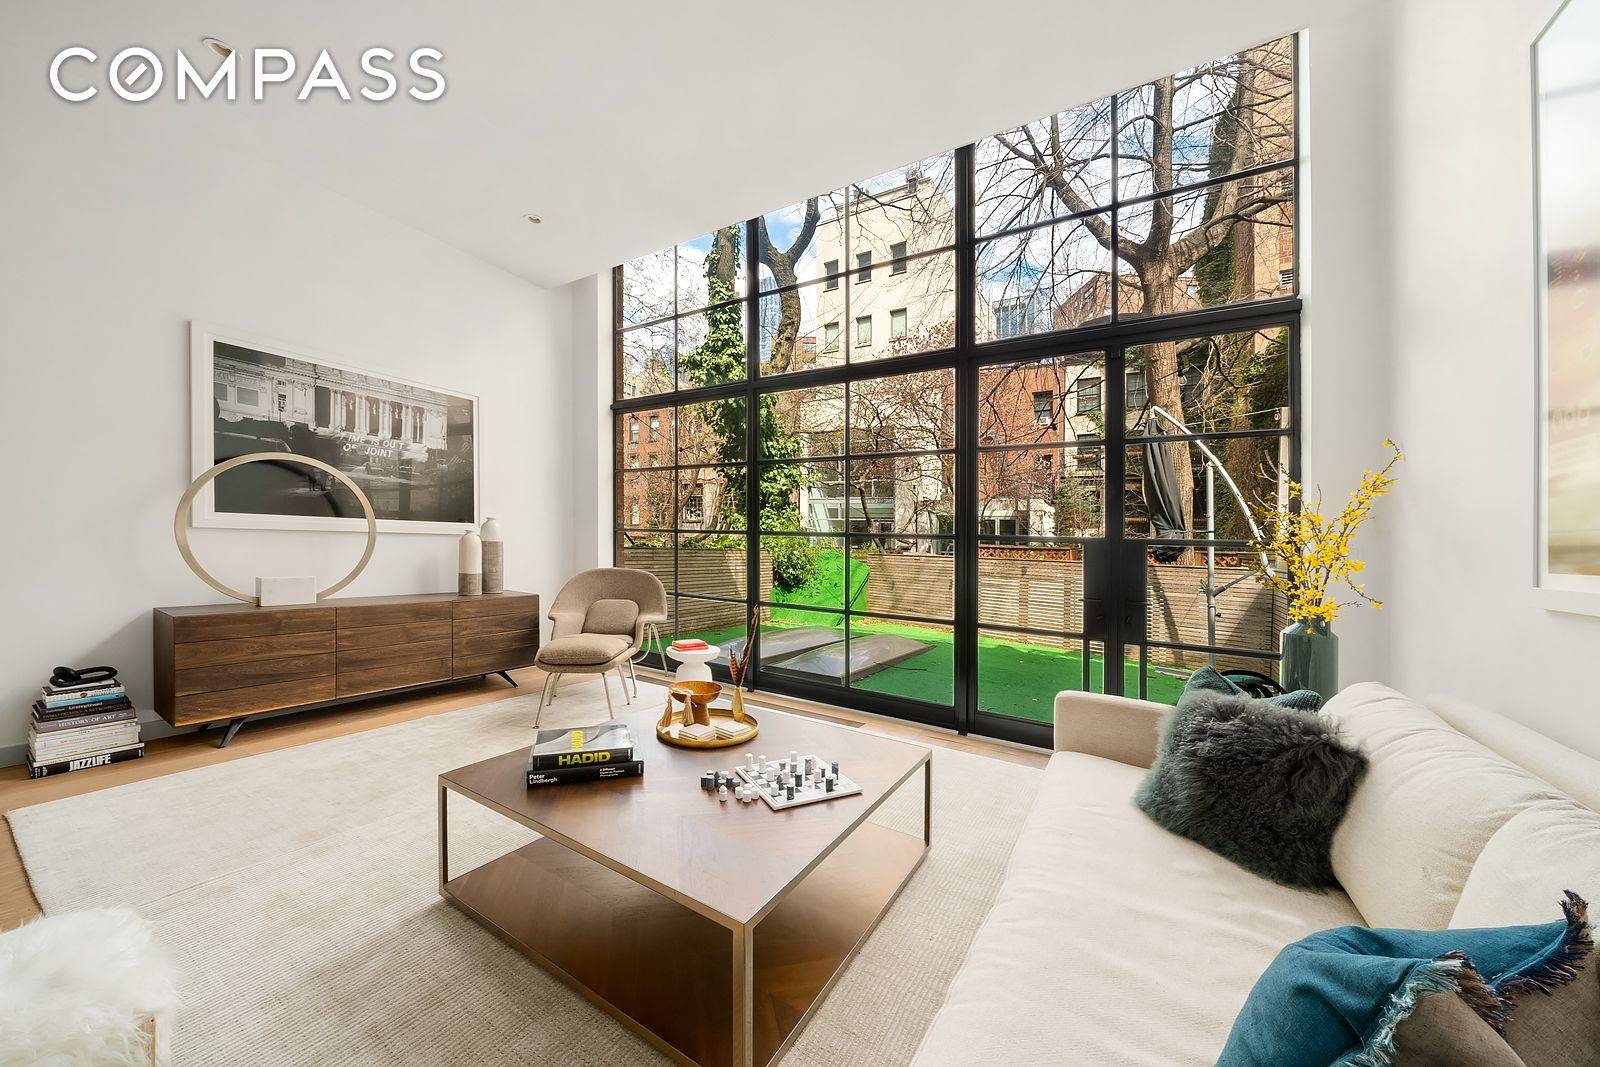 This beautifully designed 21 foot wide townhome was the creation of renowned AD 100 architects, SPaN, who crafted a highly elevated residential experience featuring an all glass rear facade at ...